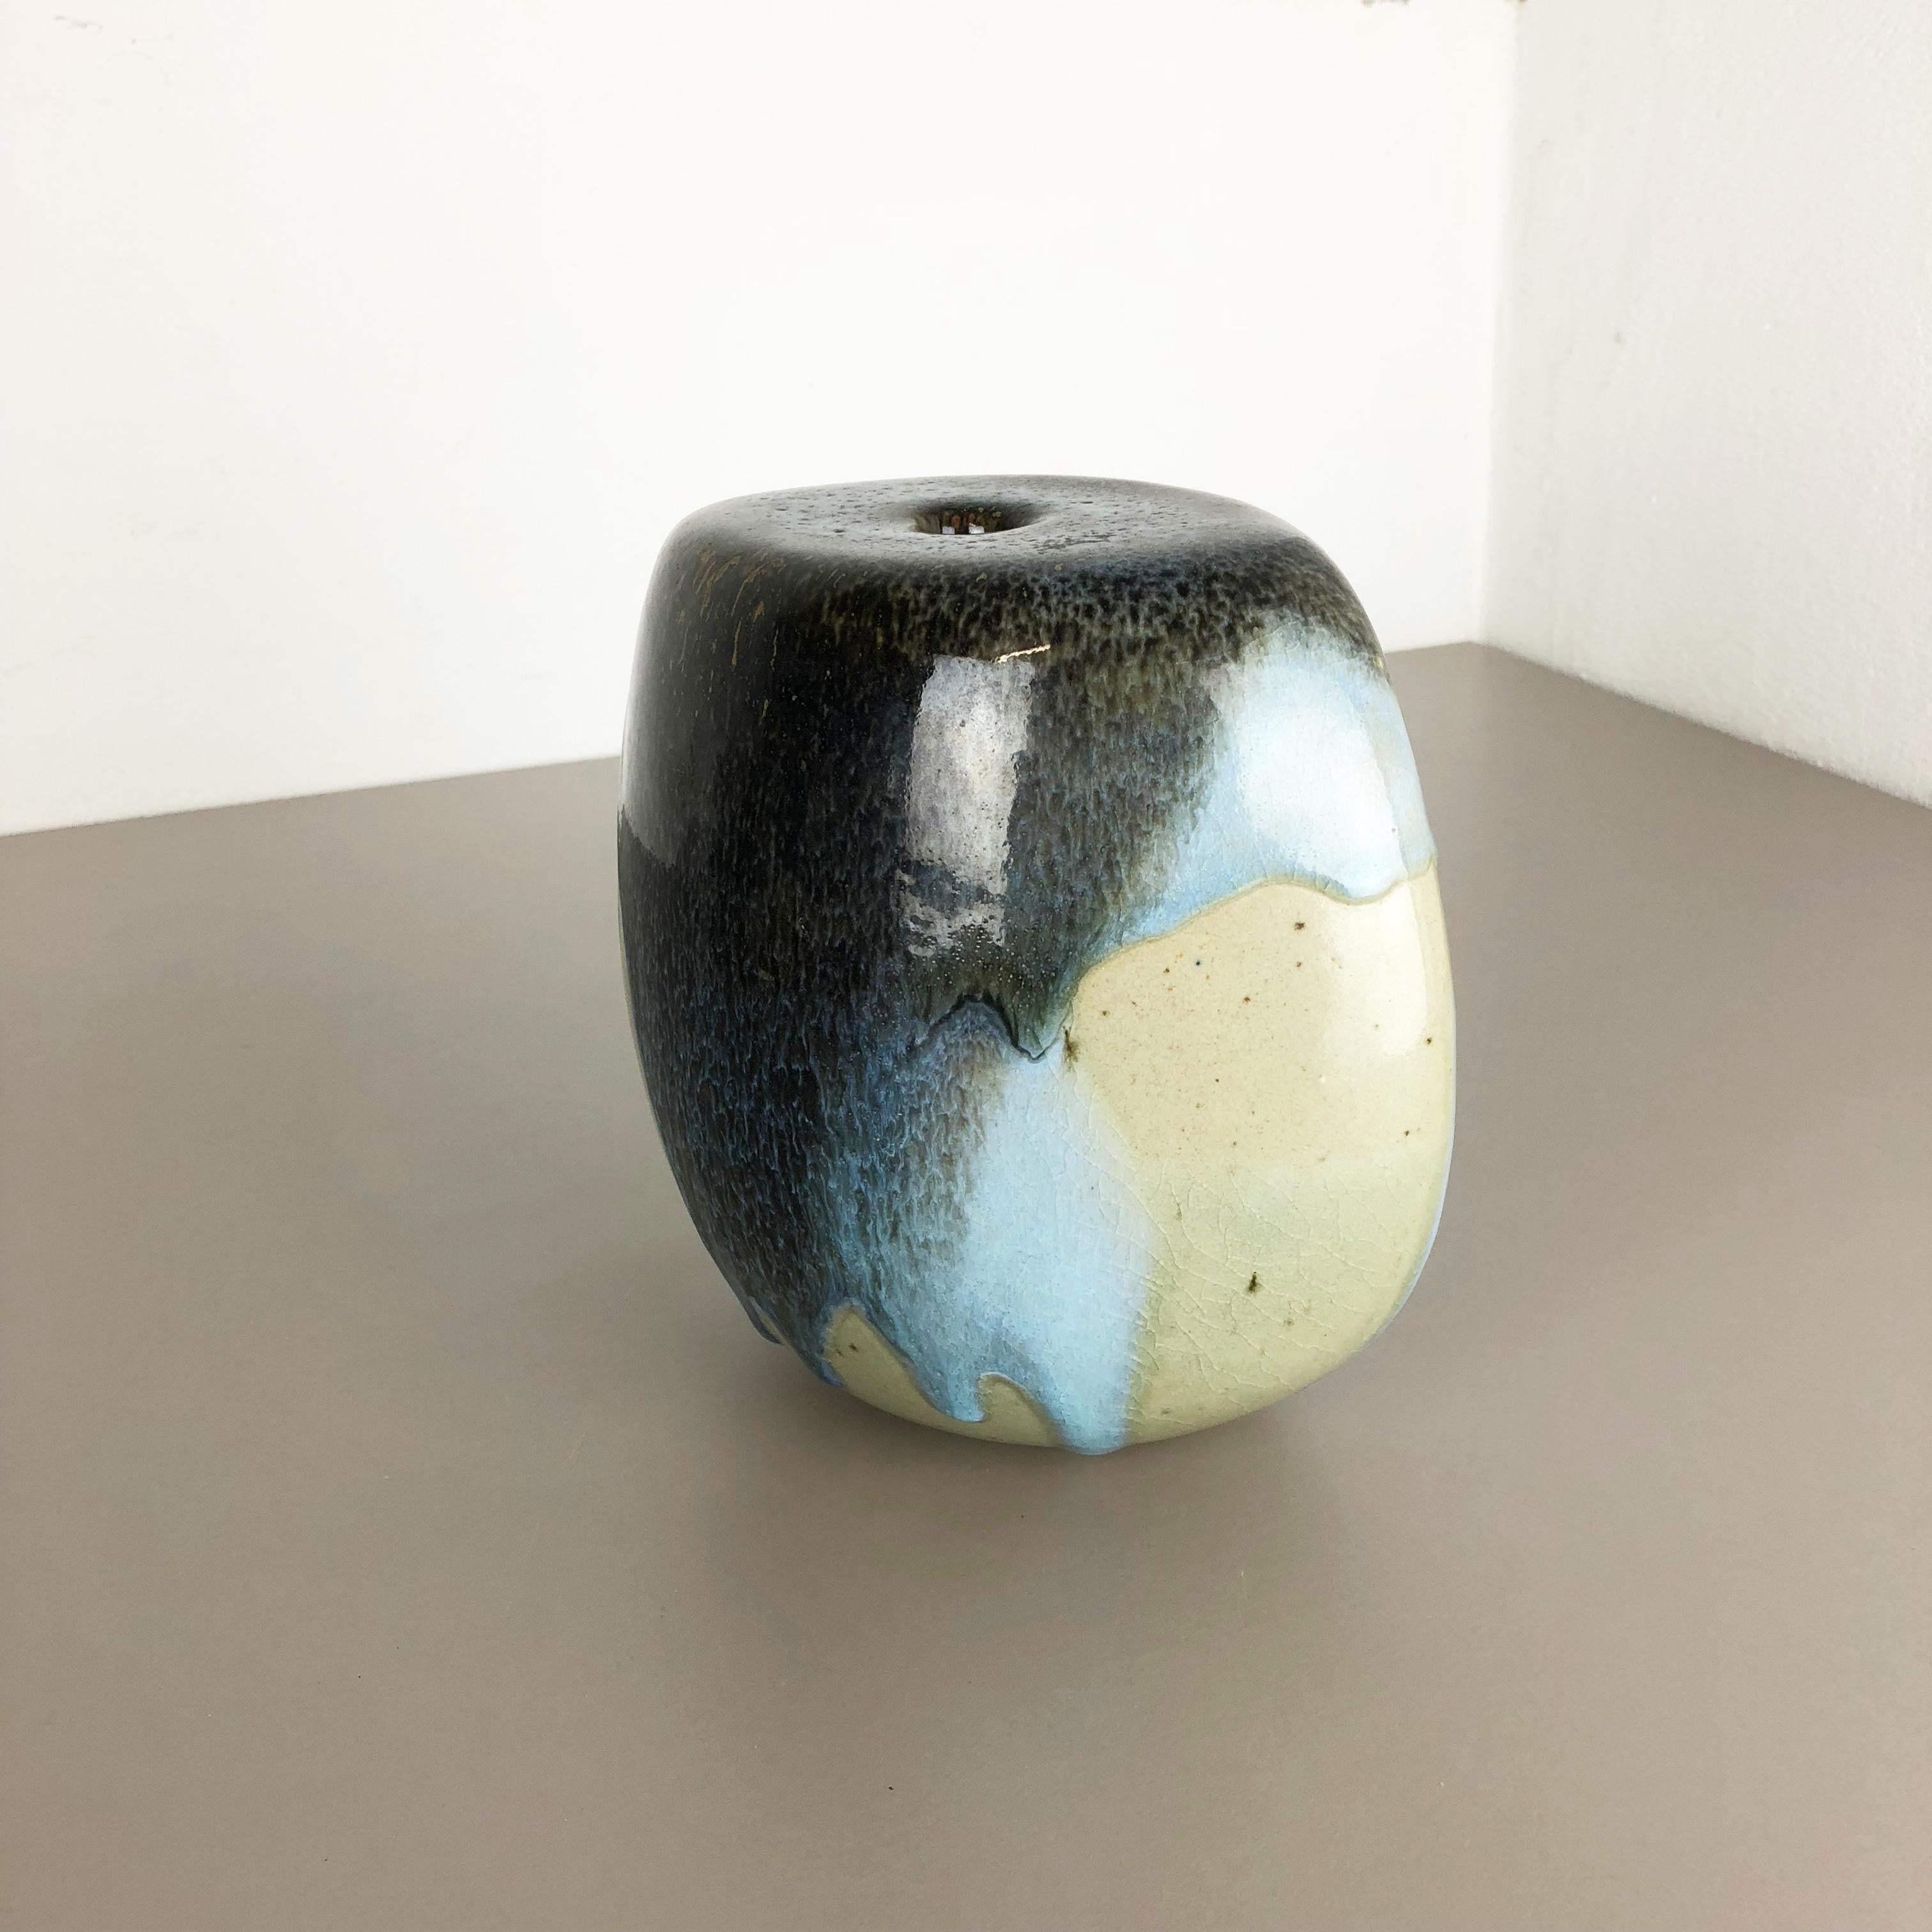 20th Century Abstract Ceramic Studio Stoneware Vase by Gotlind Weigel, Germany, 1960s For Sale